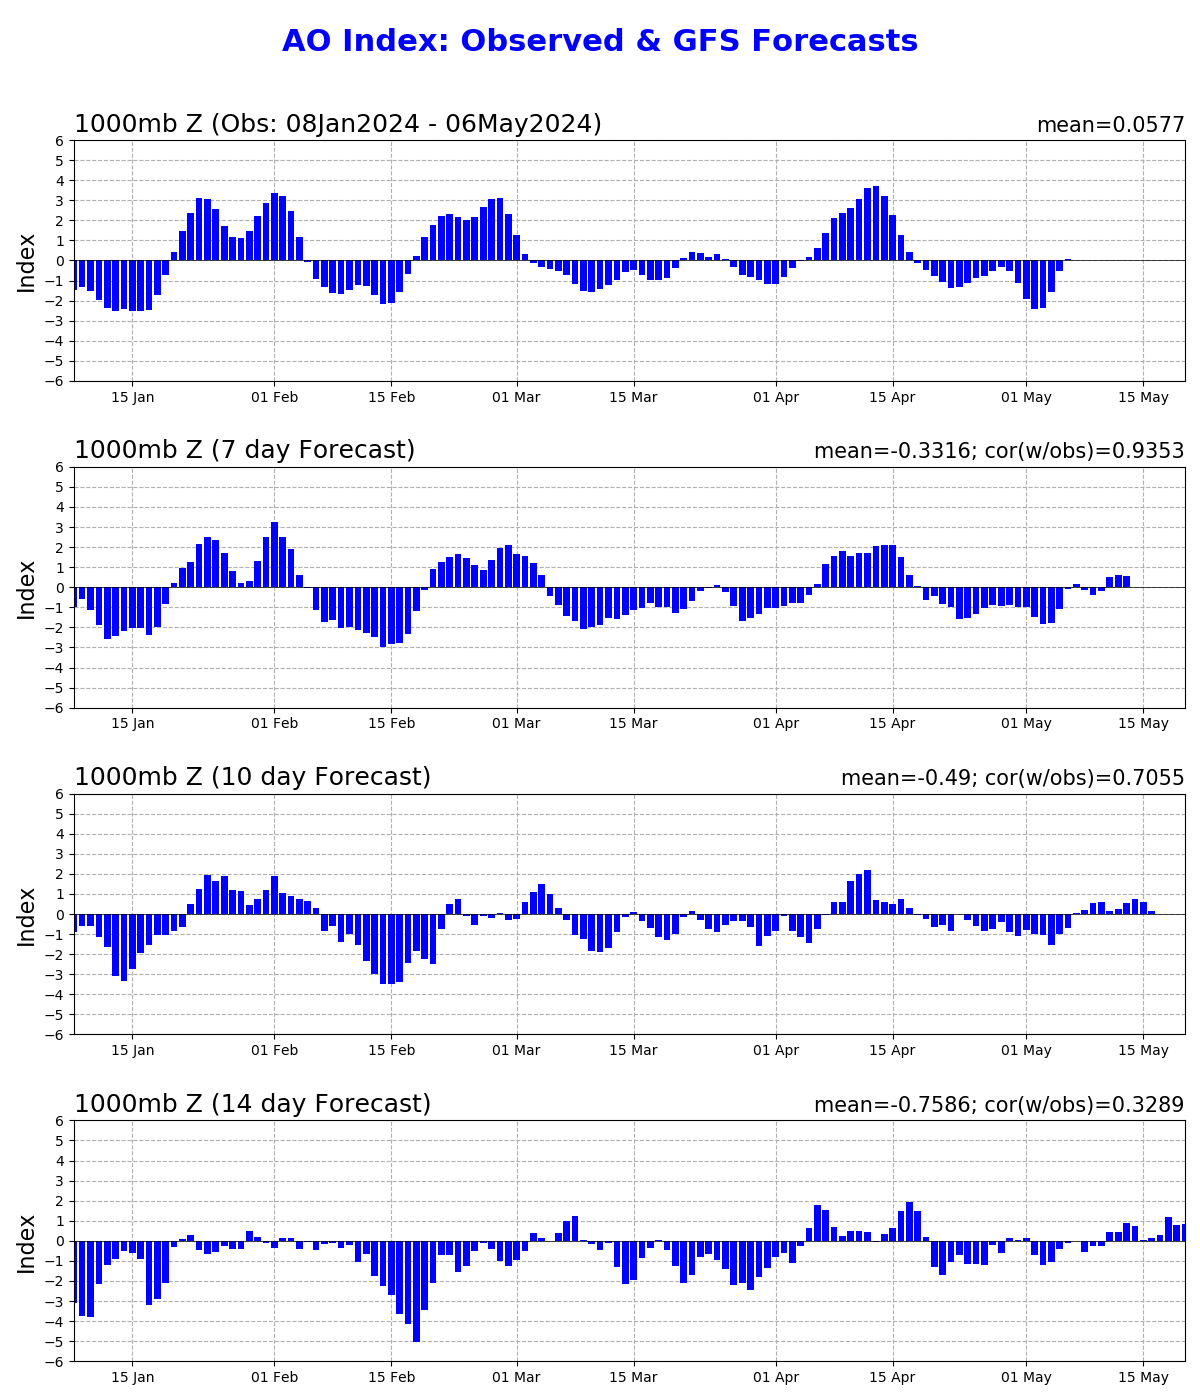 Arctic oscillation - AO index: Observed & GFS Forecasts